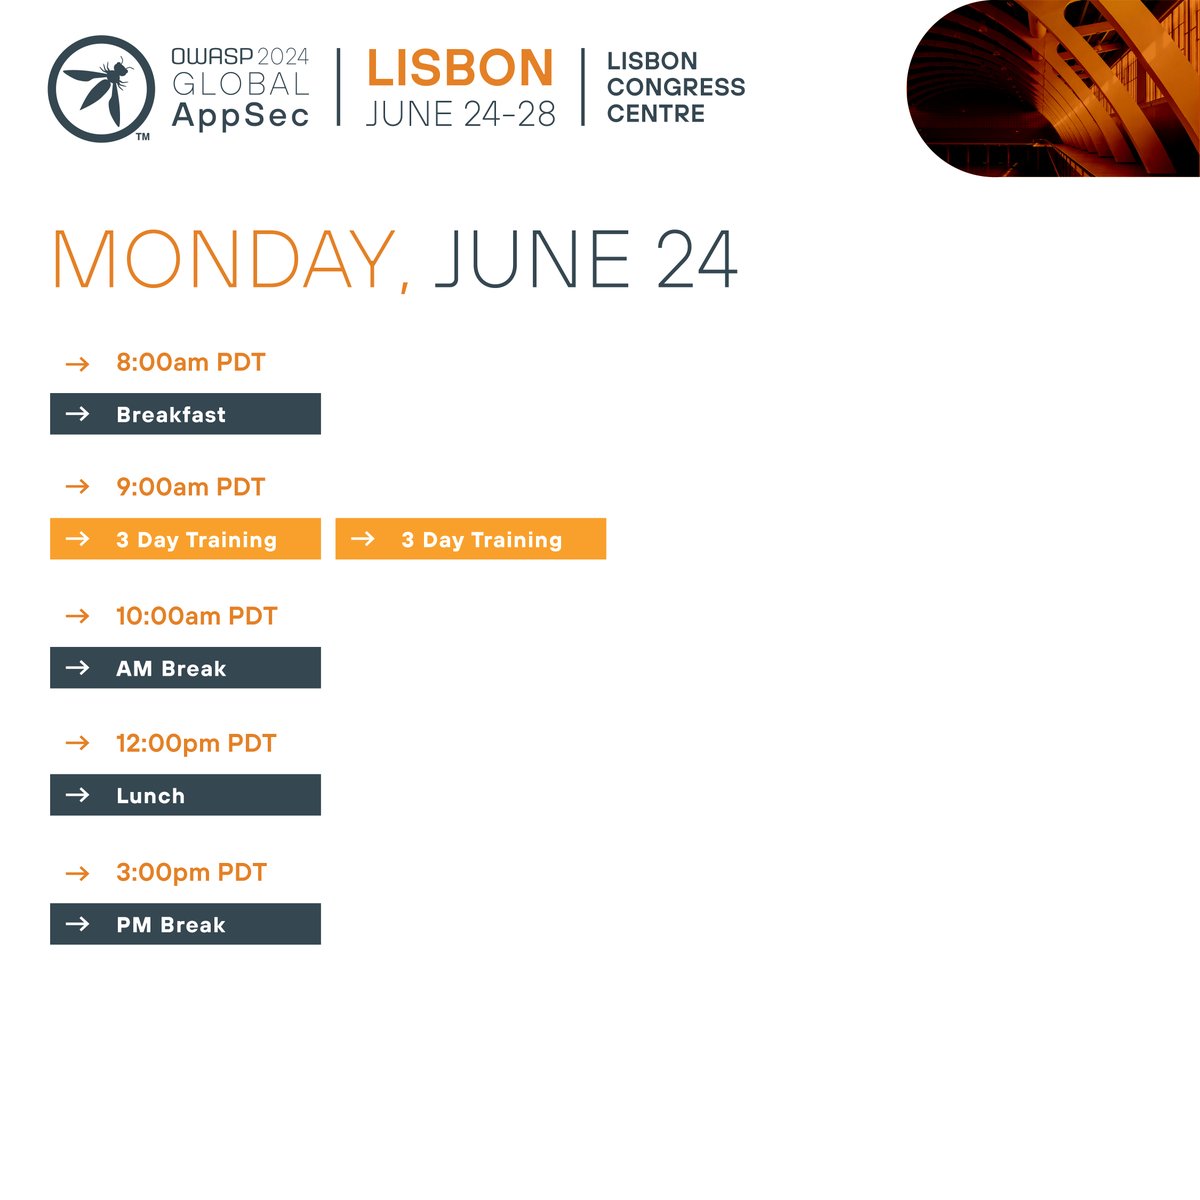 In honor of the 2024 #OWASP Global #AppSec Lisbon happening next month, here's a training schedule sneak peek! Register now to attend training sessions designed for #cybersec professionals➡️ ecs.page.link/8R8JH #lisbon #portugal #threatmodeling #informationtechnology